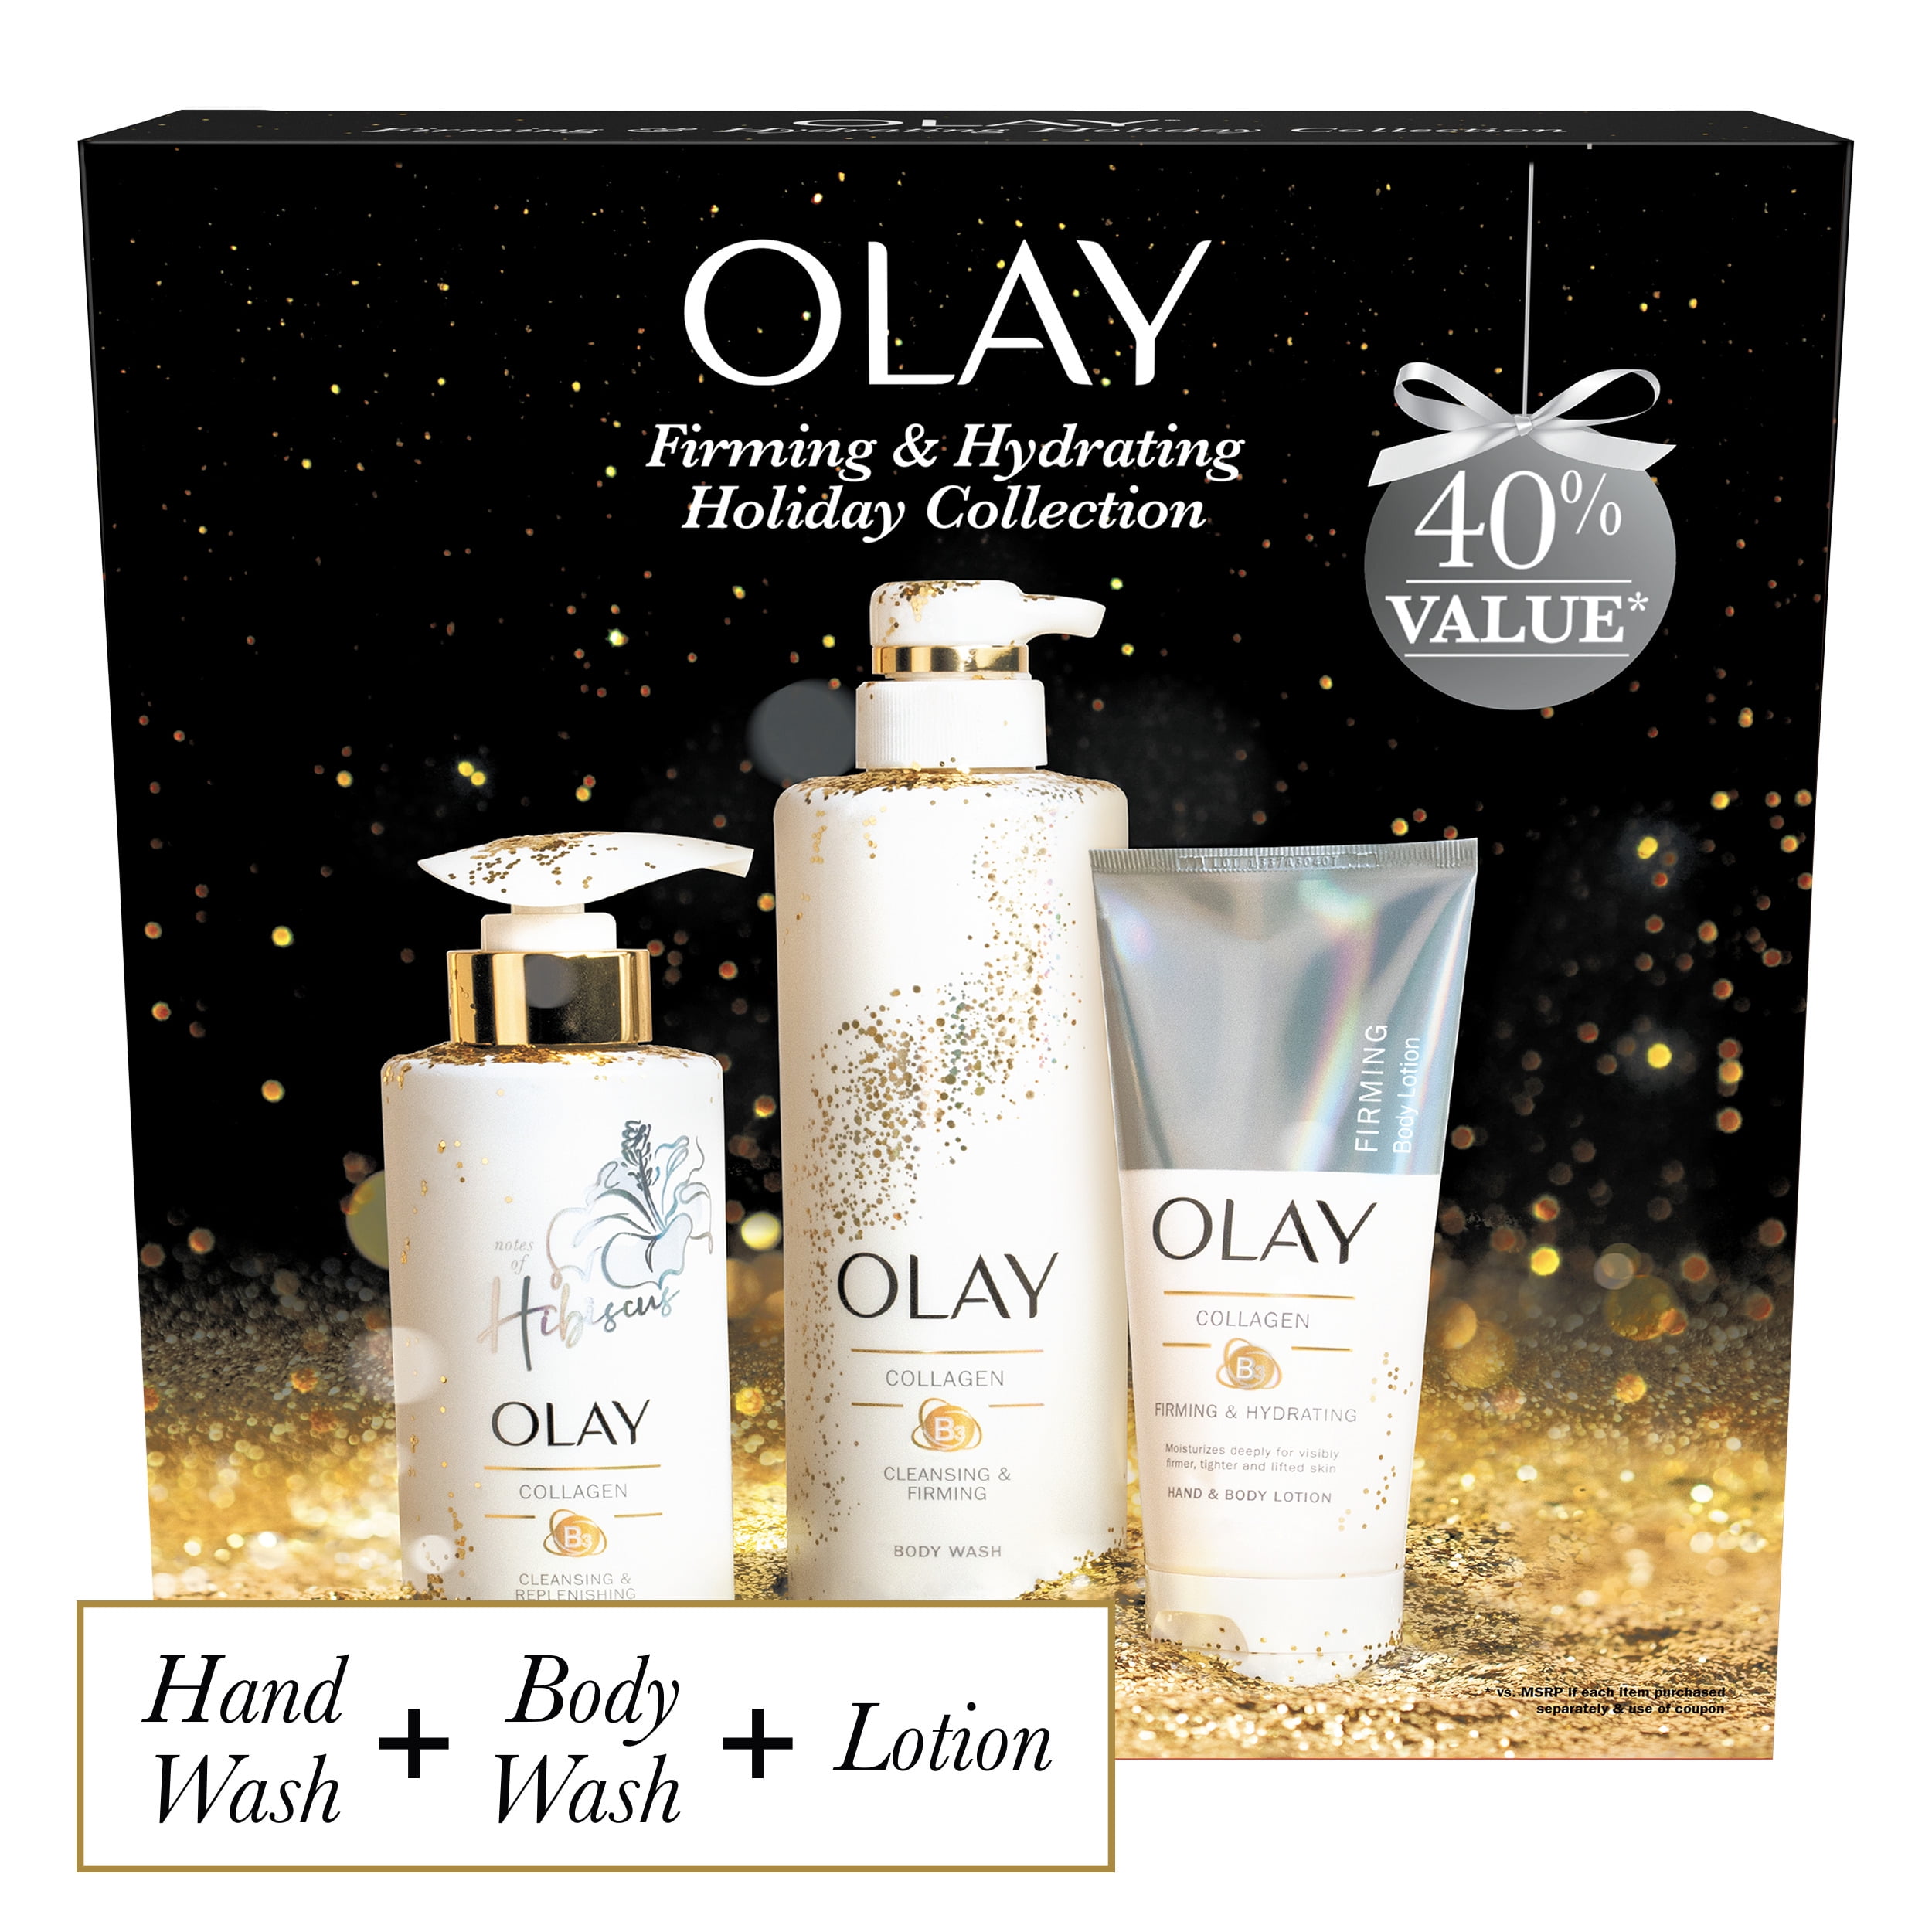 40-value-olay-holiday-gift-set-with-collagen-body-wash-17-9-oz